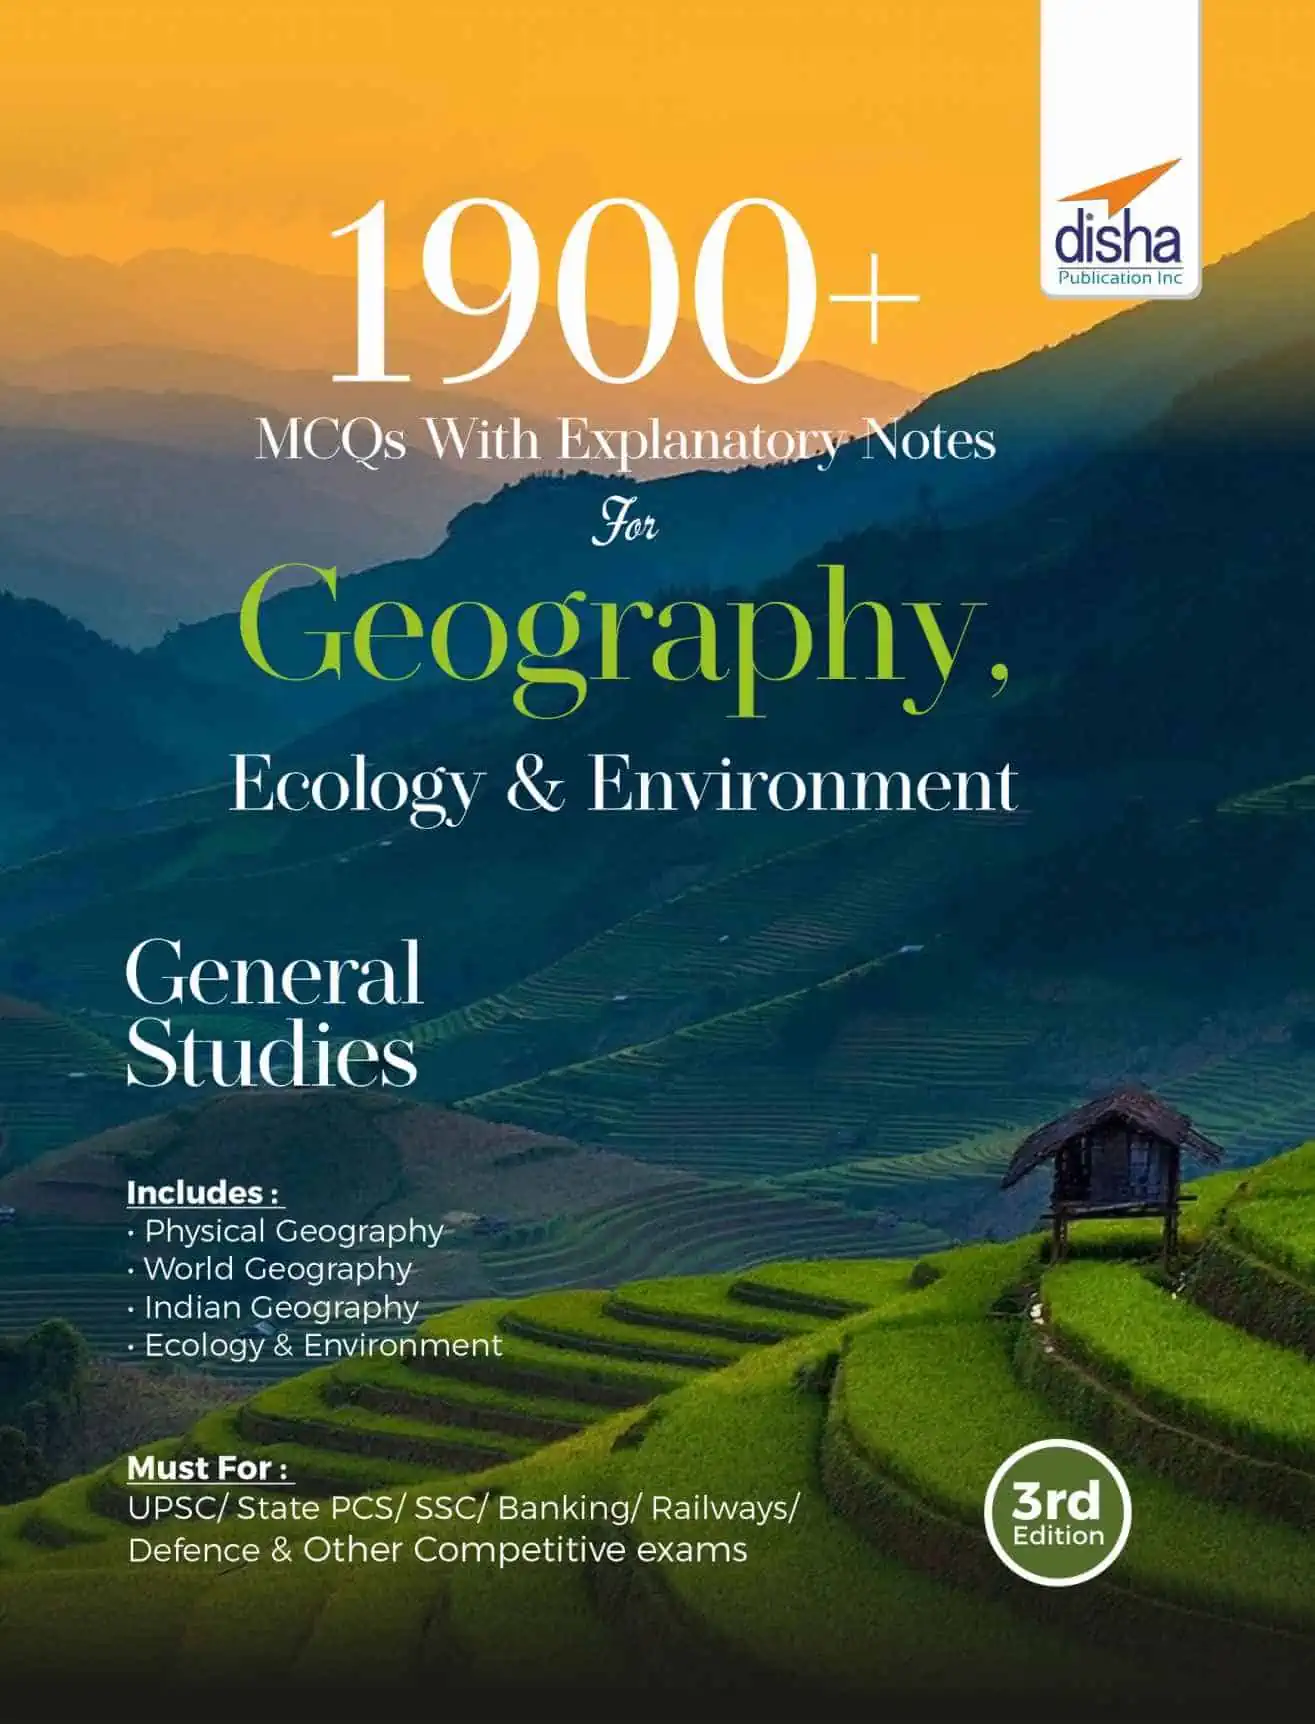 1900+ MCQs with Explanatory Notes for Geography - Disha